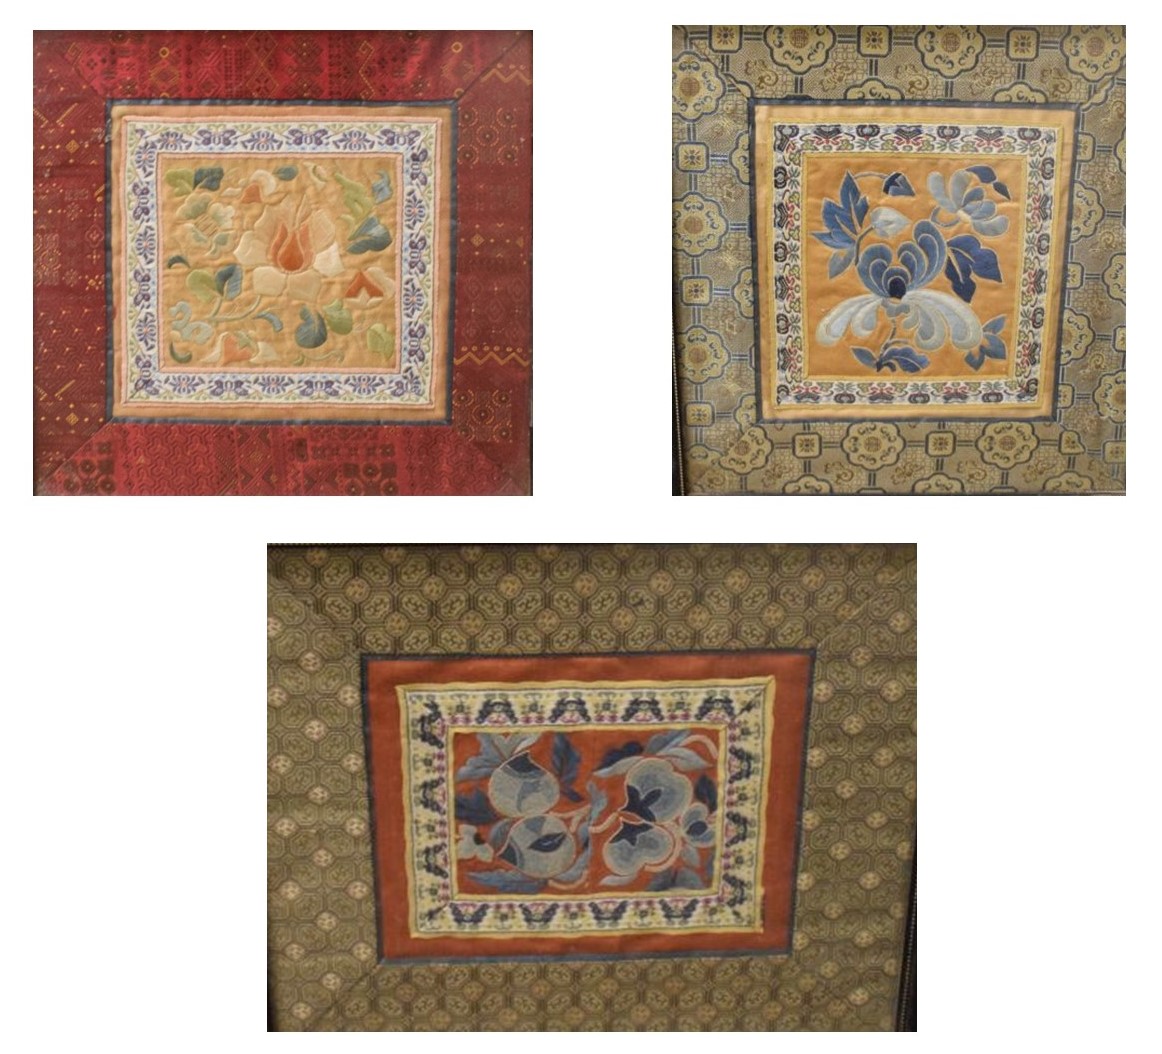 Three Chinese silk panels, largest 22.5cm x 21.5cm, framed and glazed Condition: Scratches present